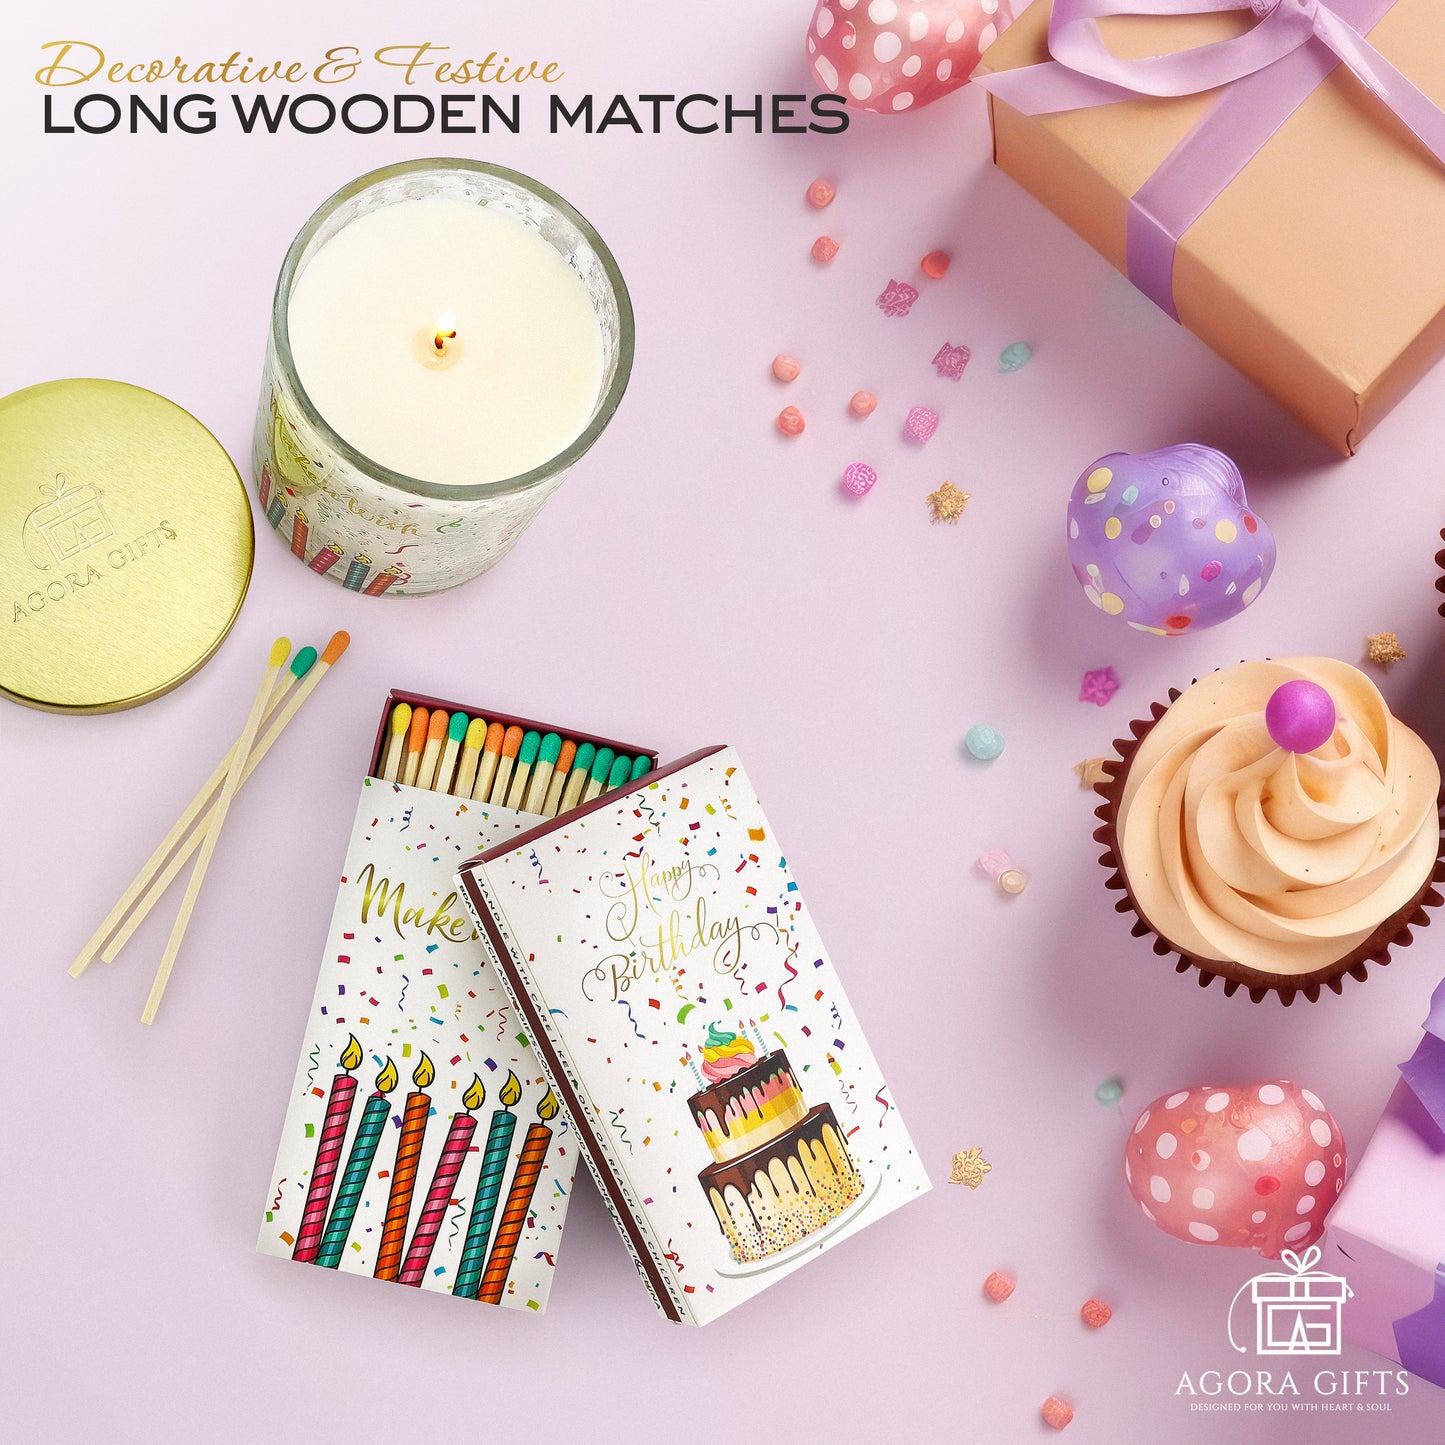 Happy Birthday Matches Box - 4-Inch Long Matches for Candles with Strike - Wooden Colorful Matches with Fancy Rainbow Tips - 50 Pc Match Stick Box